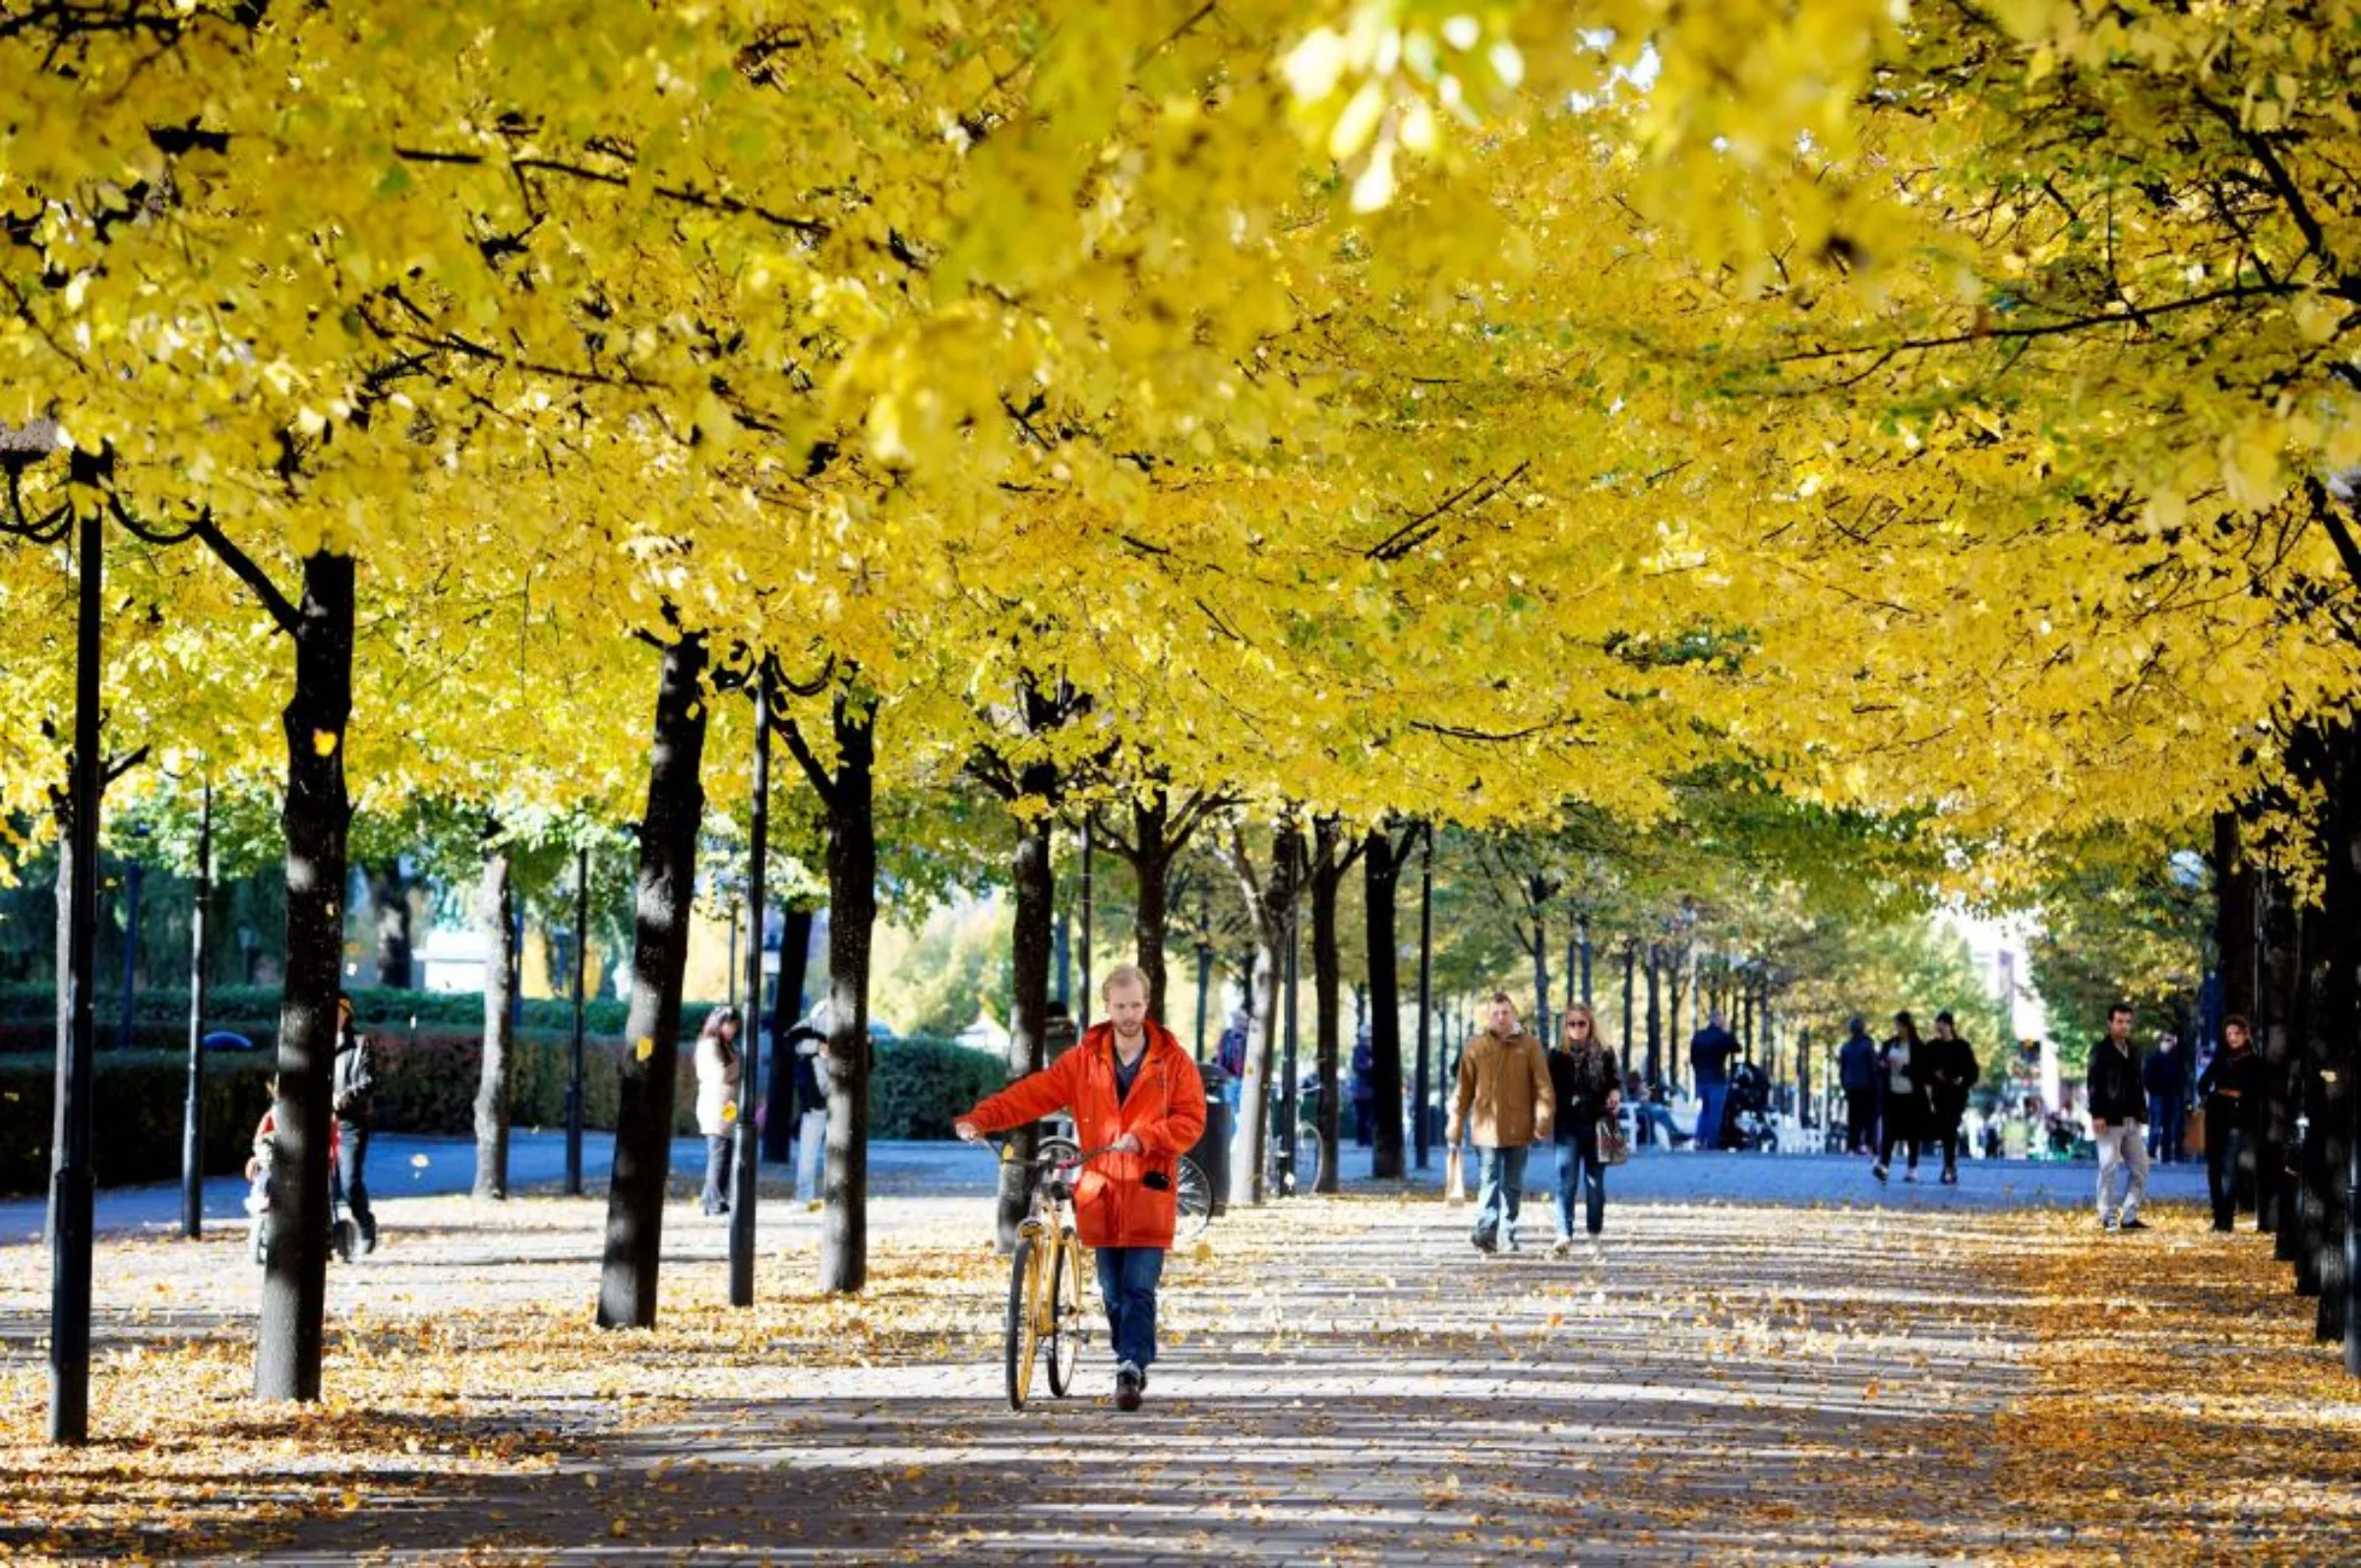 A man pushes his bicycle on a sunny autumn day down a tree-lined street in Stockholm October 13, 2013